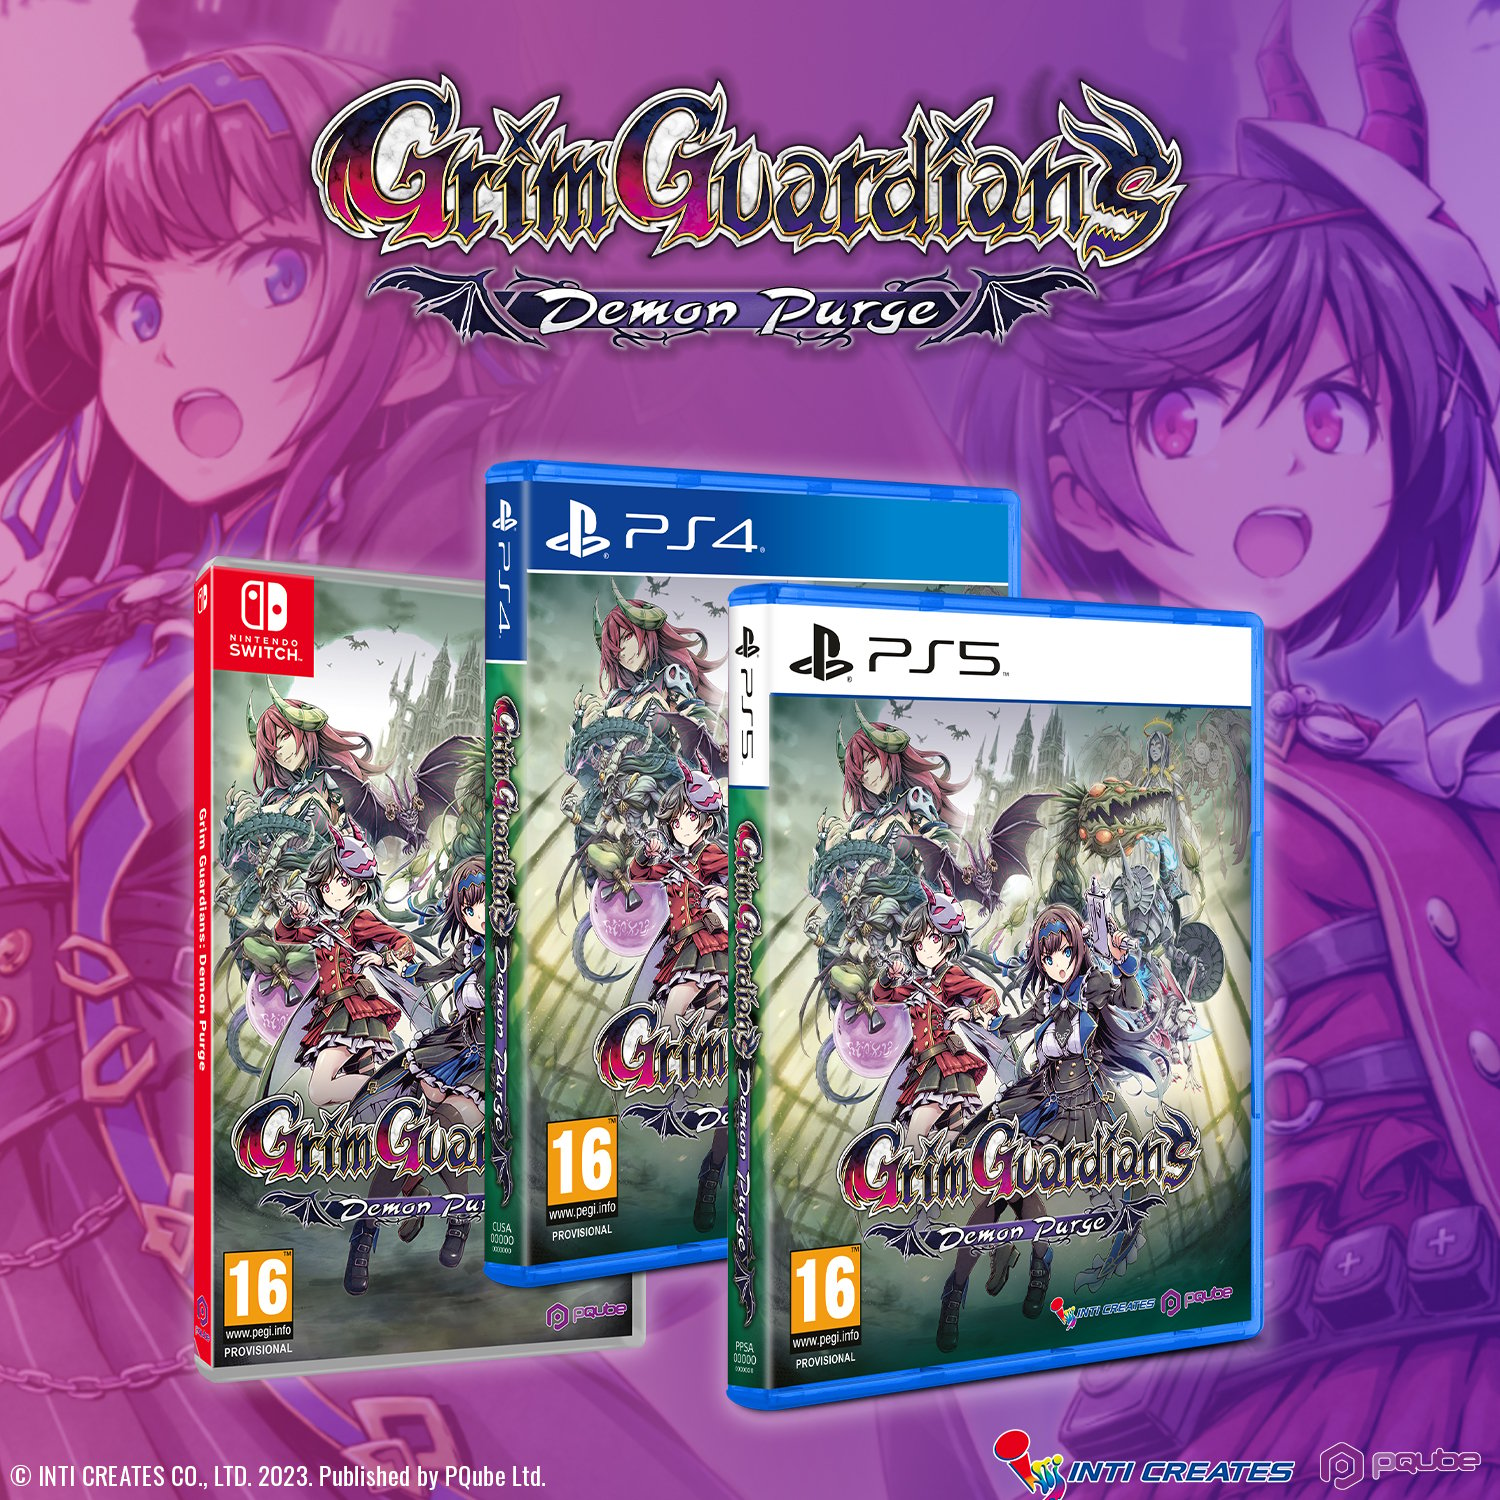 #
      Grim Guardians: Demon Purge physical editions for PS5, PS4, and Switch to be published by PQube in the west